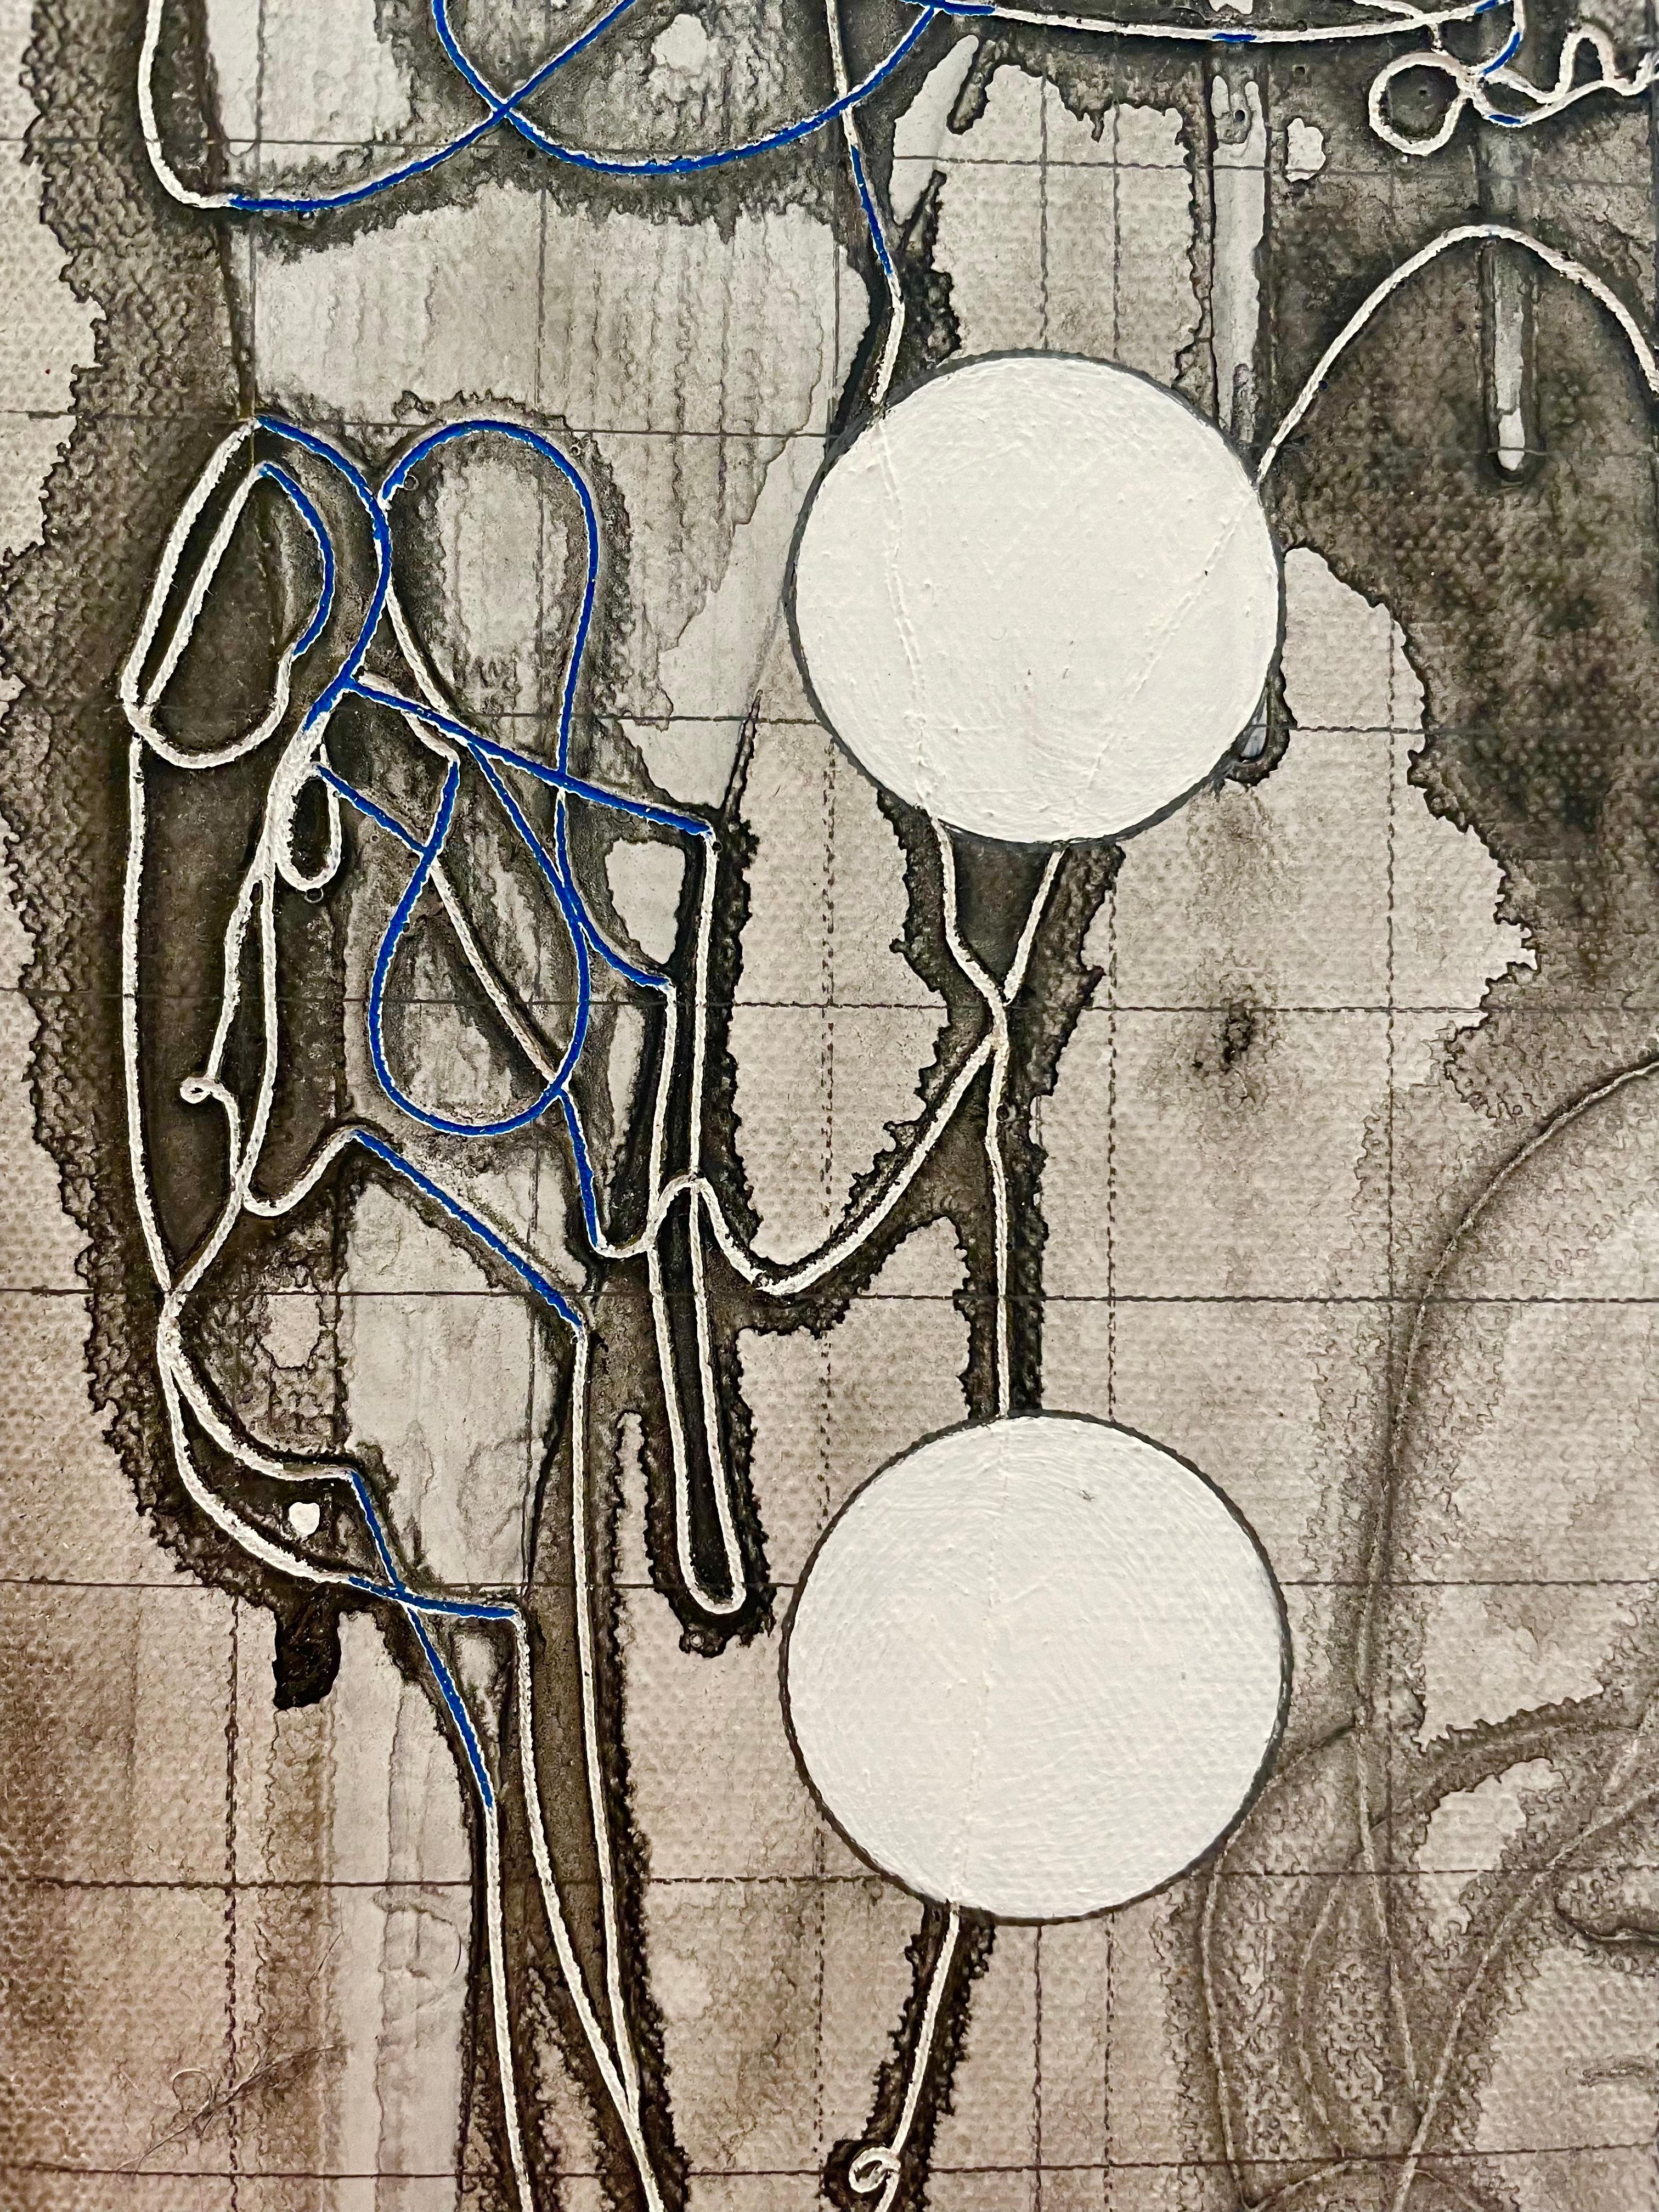 100 Lives: abstract painting on canvas in blue & gray w/ circles & grid - Painting by Antonio Puri